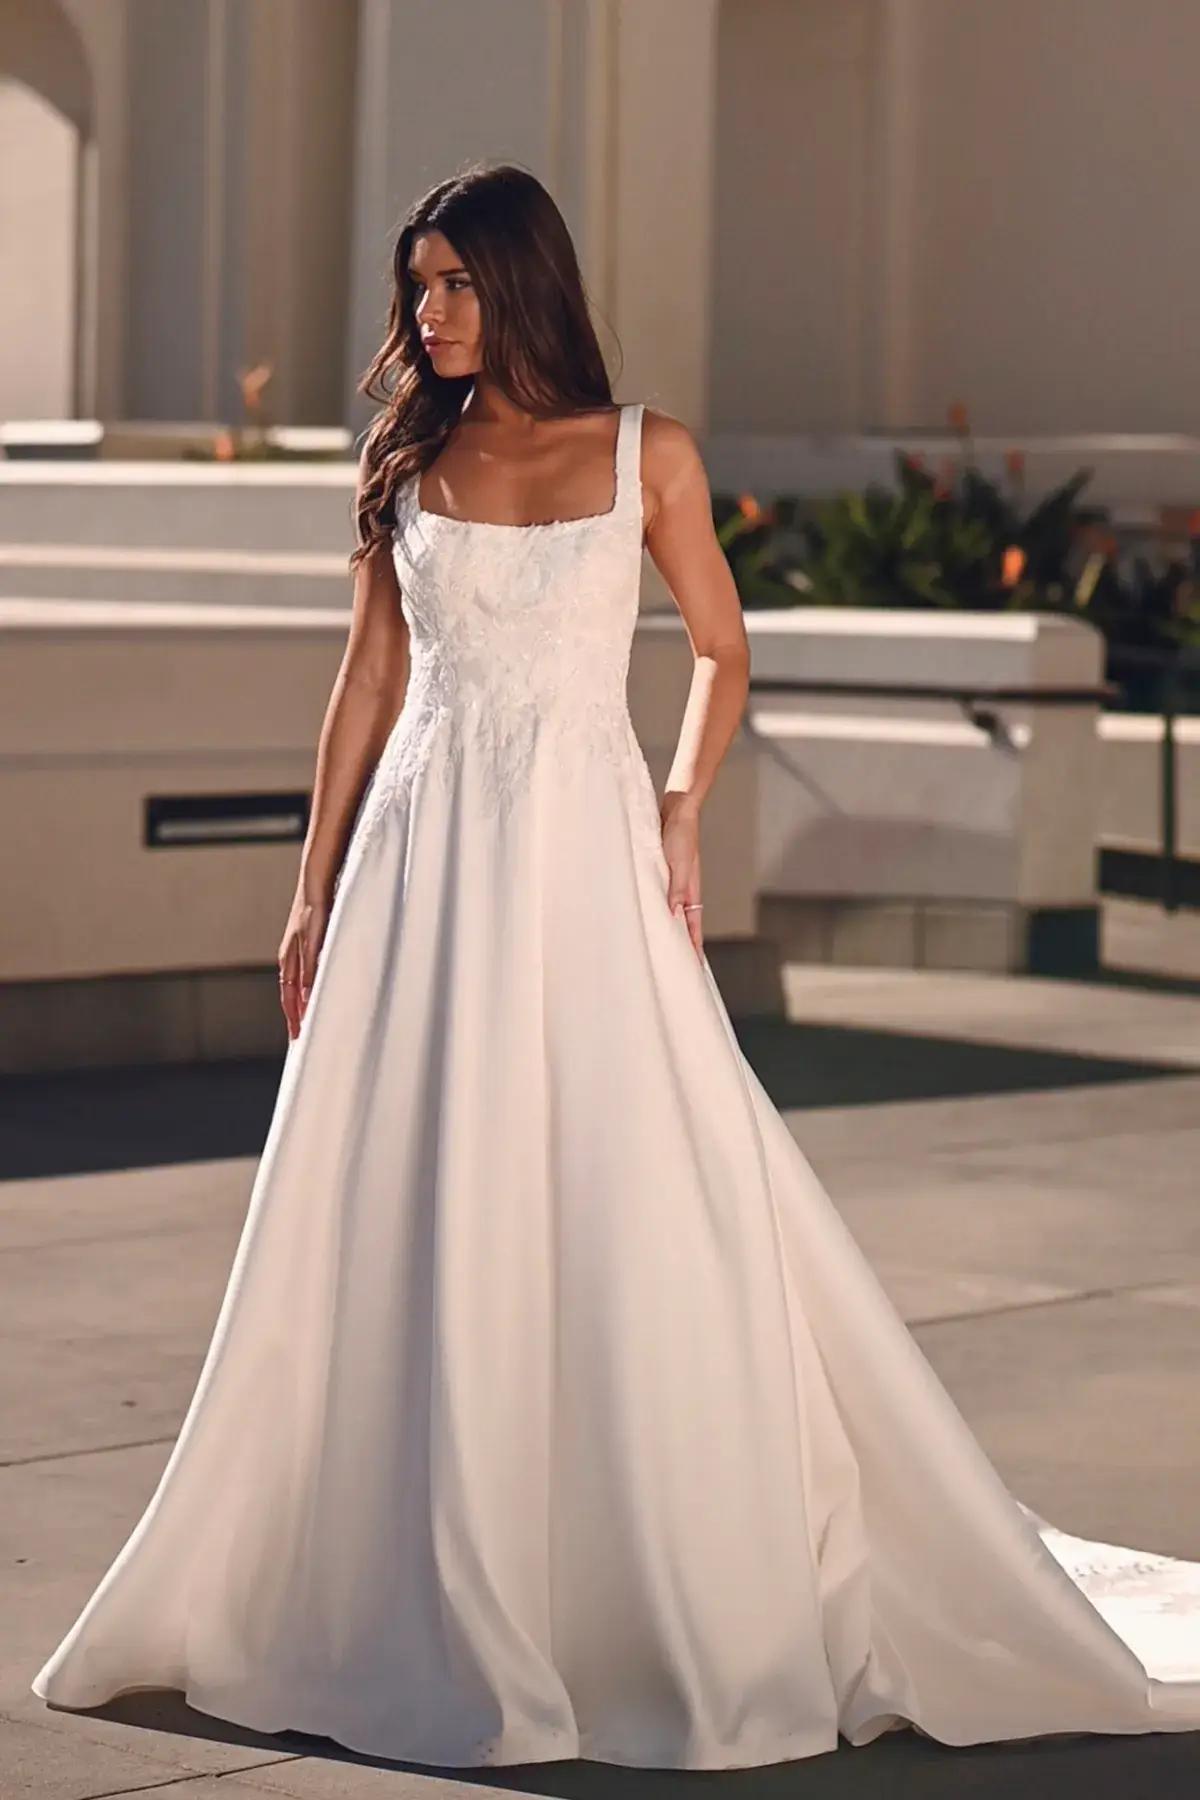 From Classic to Contemporary: Picking Your Wedding Dress for Any Theme Image